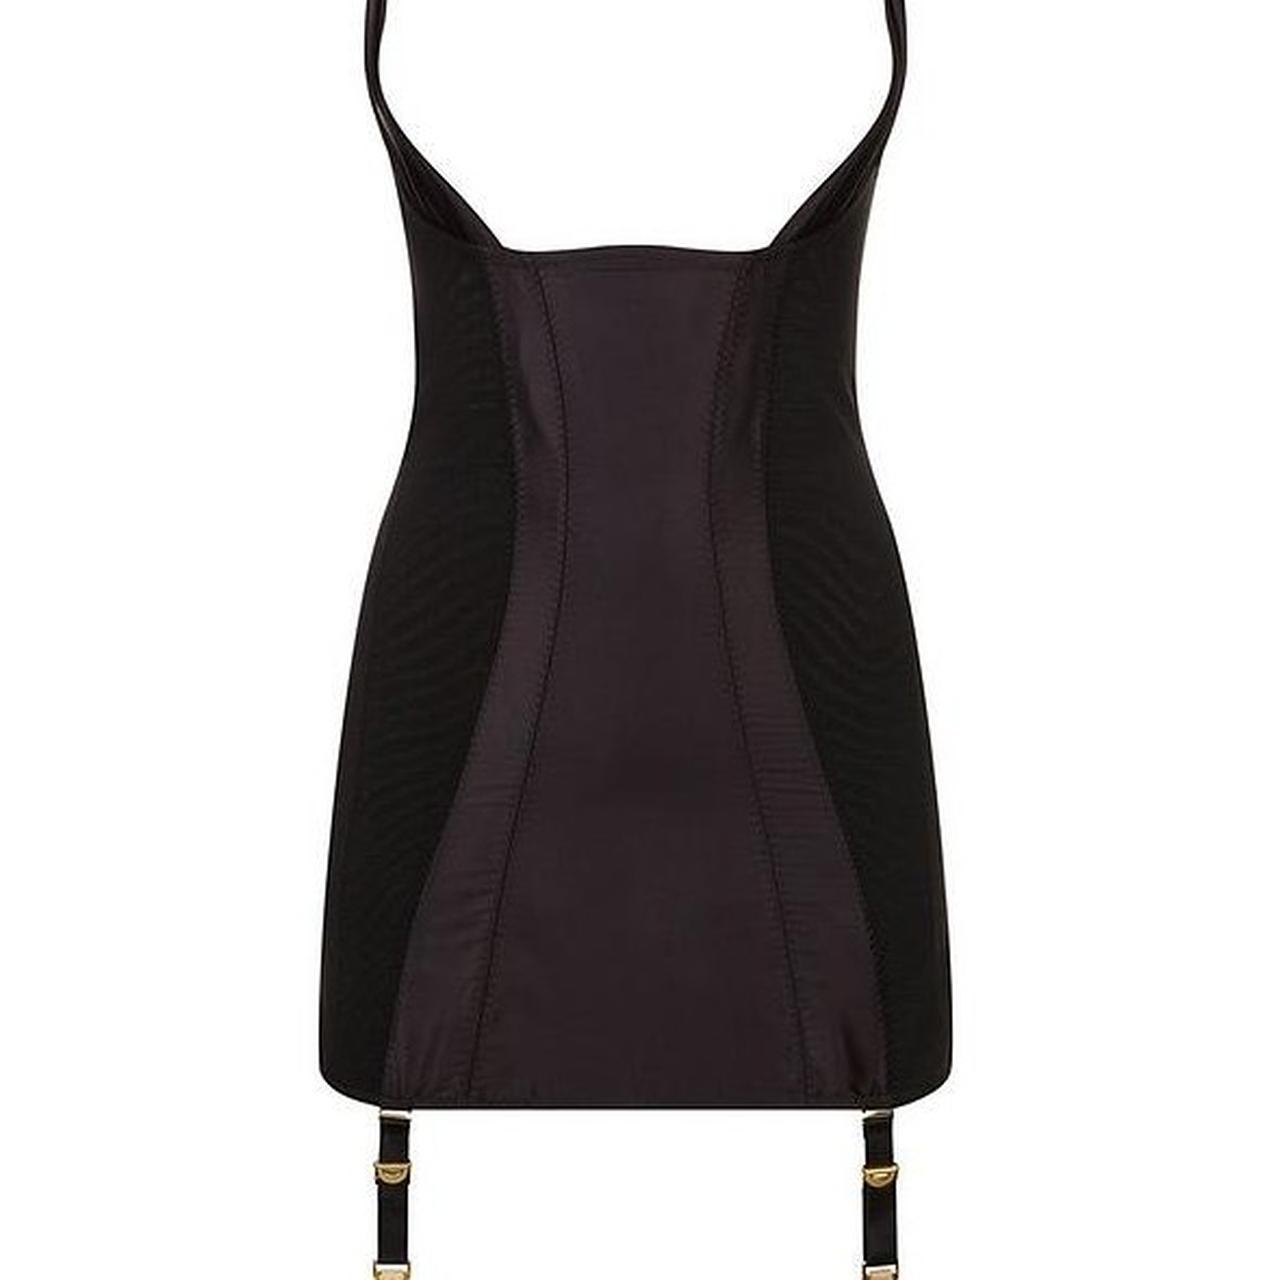 Ann Summers Besotted Shapewear Cami Suspender